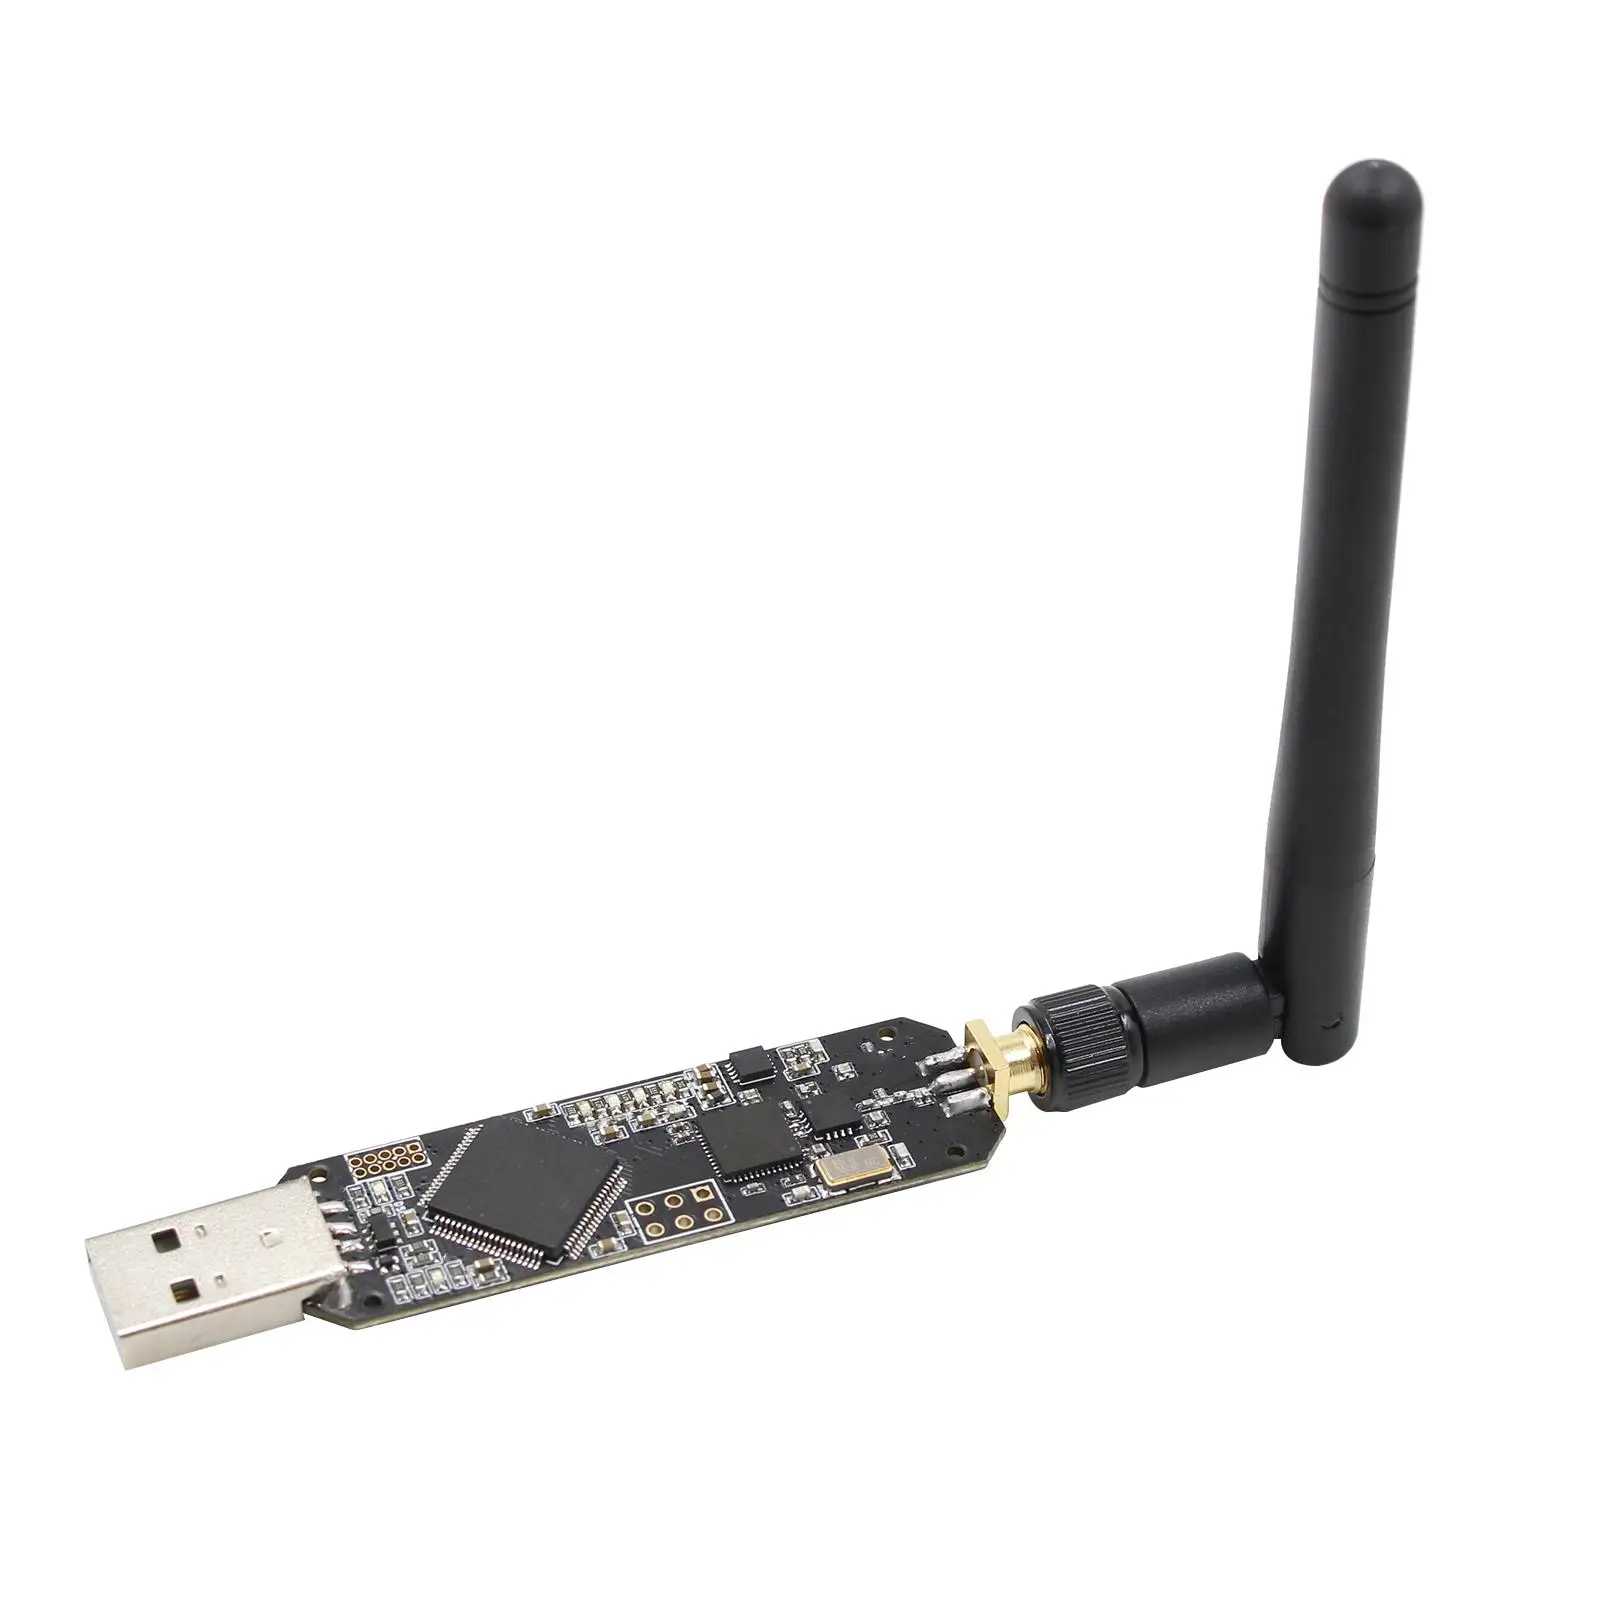 2.4G Ubertooth One Bluetooth Sniffer Open Source Test BLE 1PC 50-Mil Jtag Bluetooth protocol Analysis 10-Pin for Home Windows PC